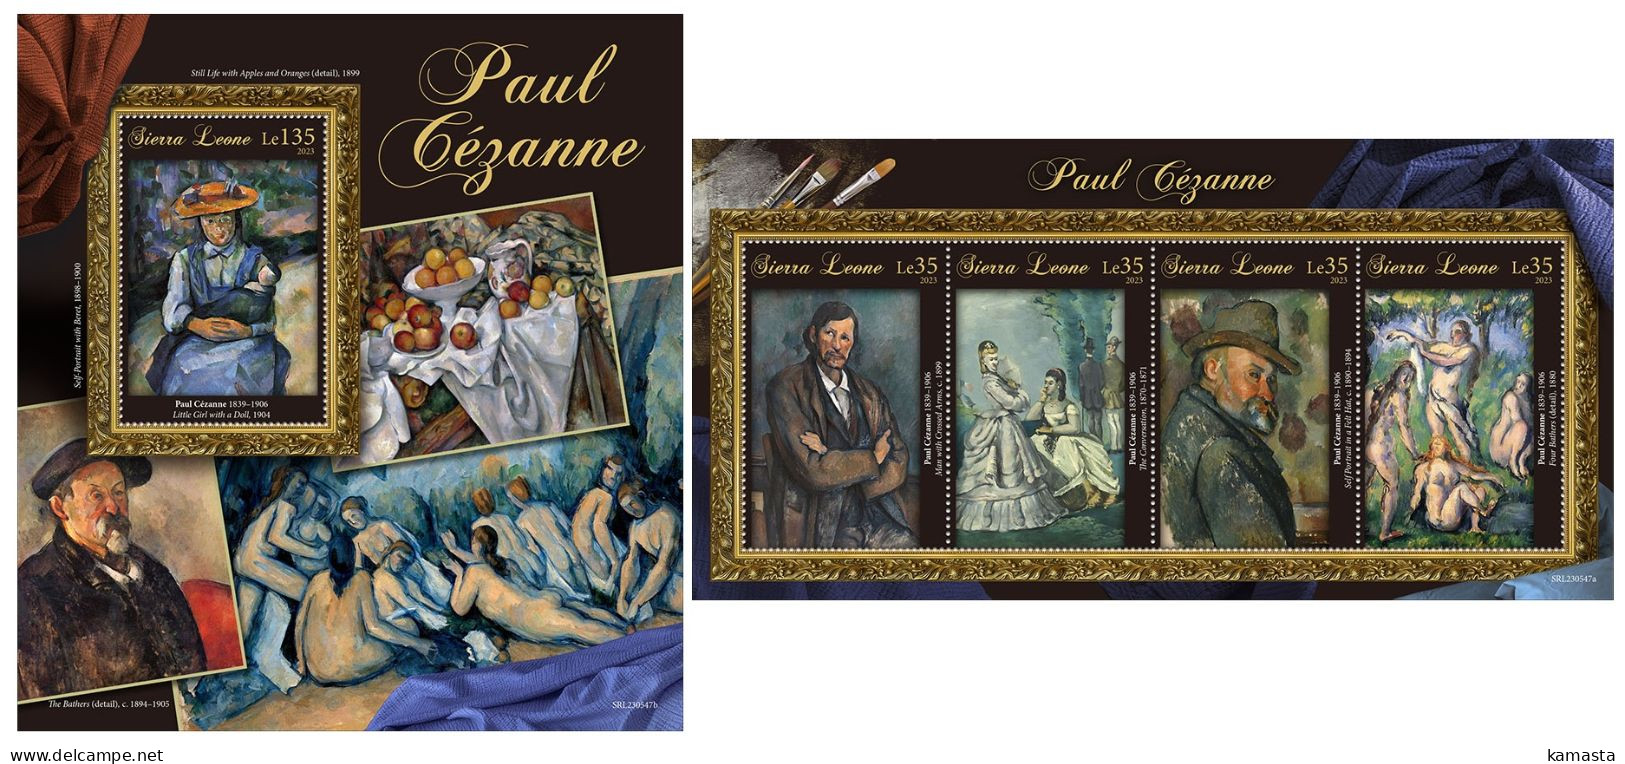 Sierra Leone 2023 Paul Cézanne. (547) OFFICIAL ISSUE - Impressionismus